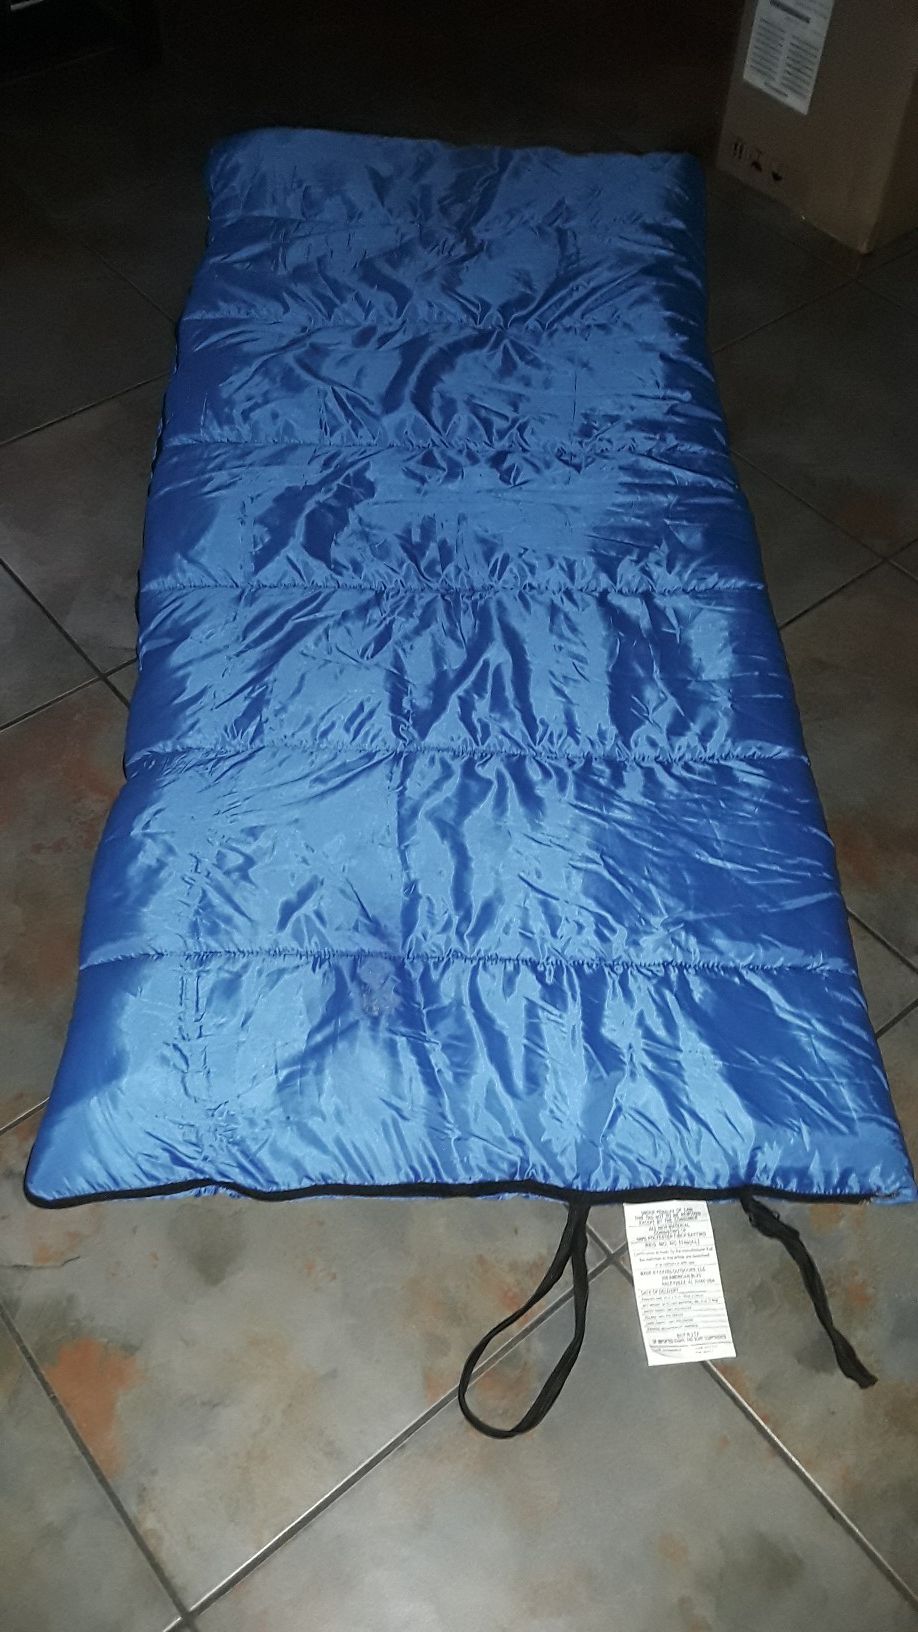 Thick comfortable clean sleeping bag